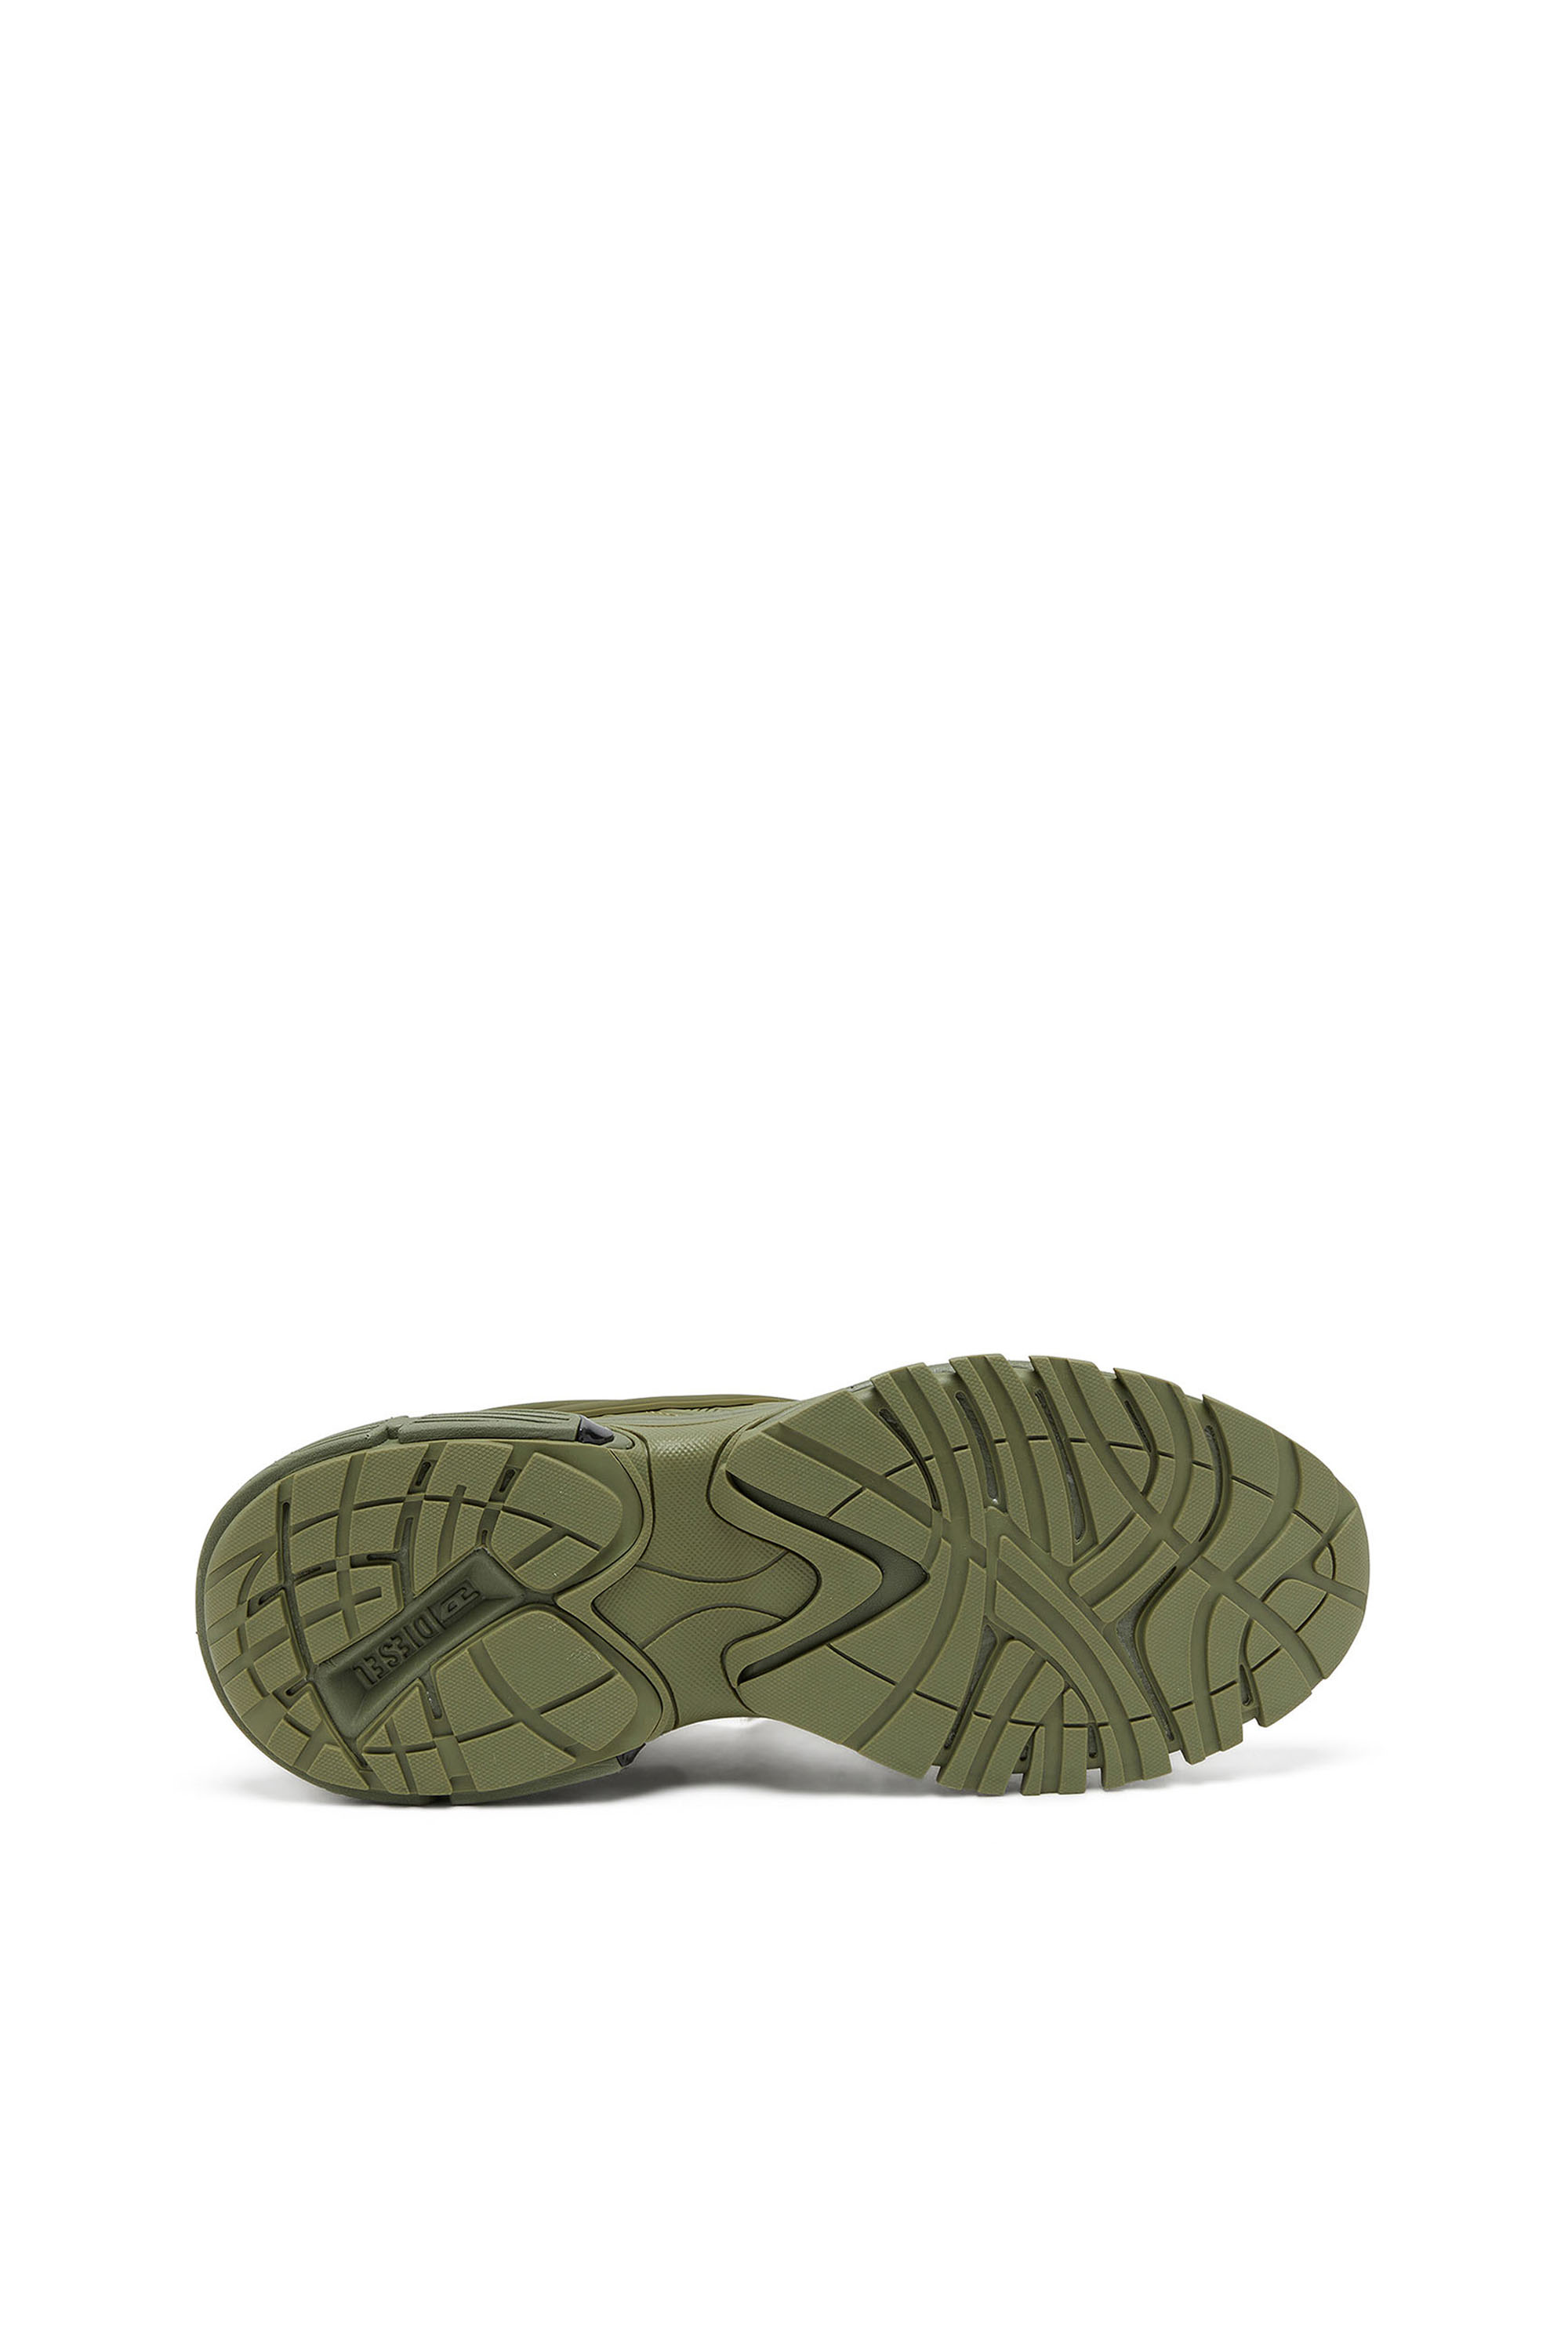 Diesel - S-SERENDIPITY PRO-X1, Man S-Serendipity-Monochrome sneakers in mesh and PU in Green - Image 4